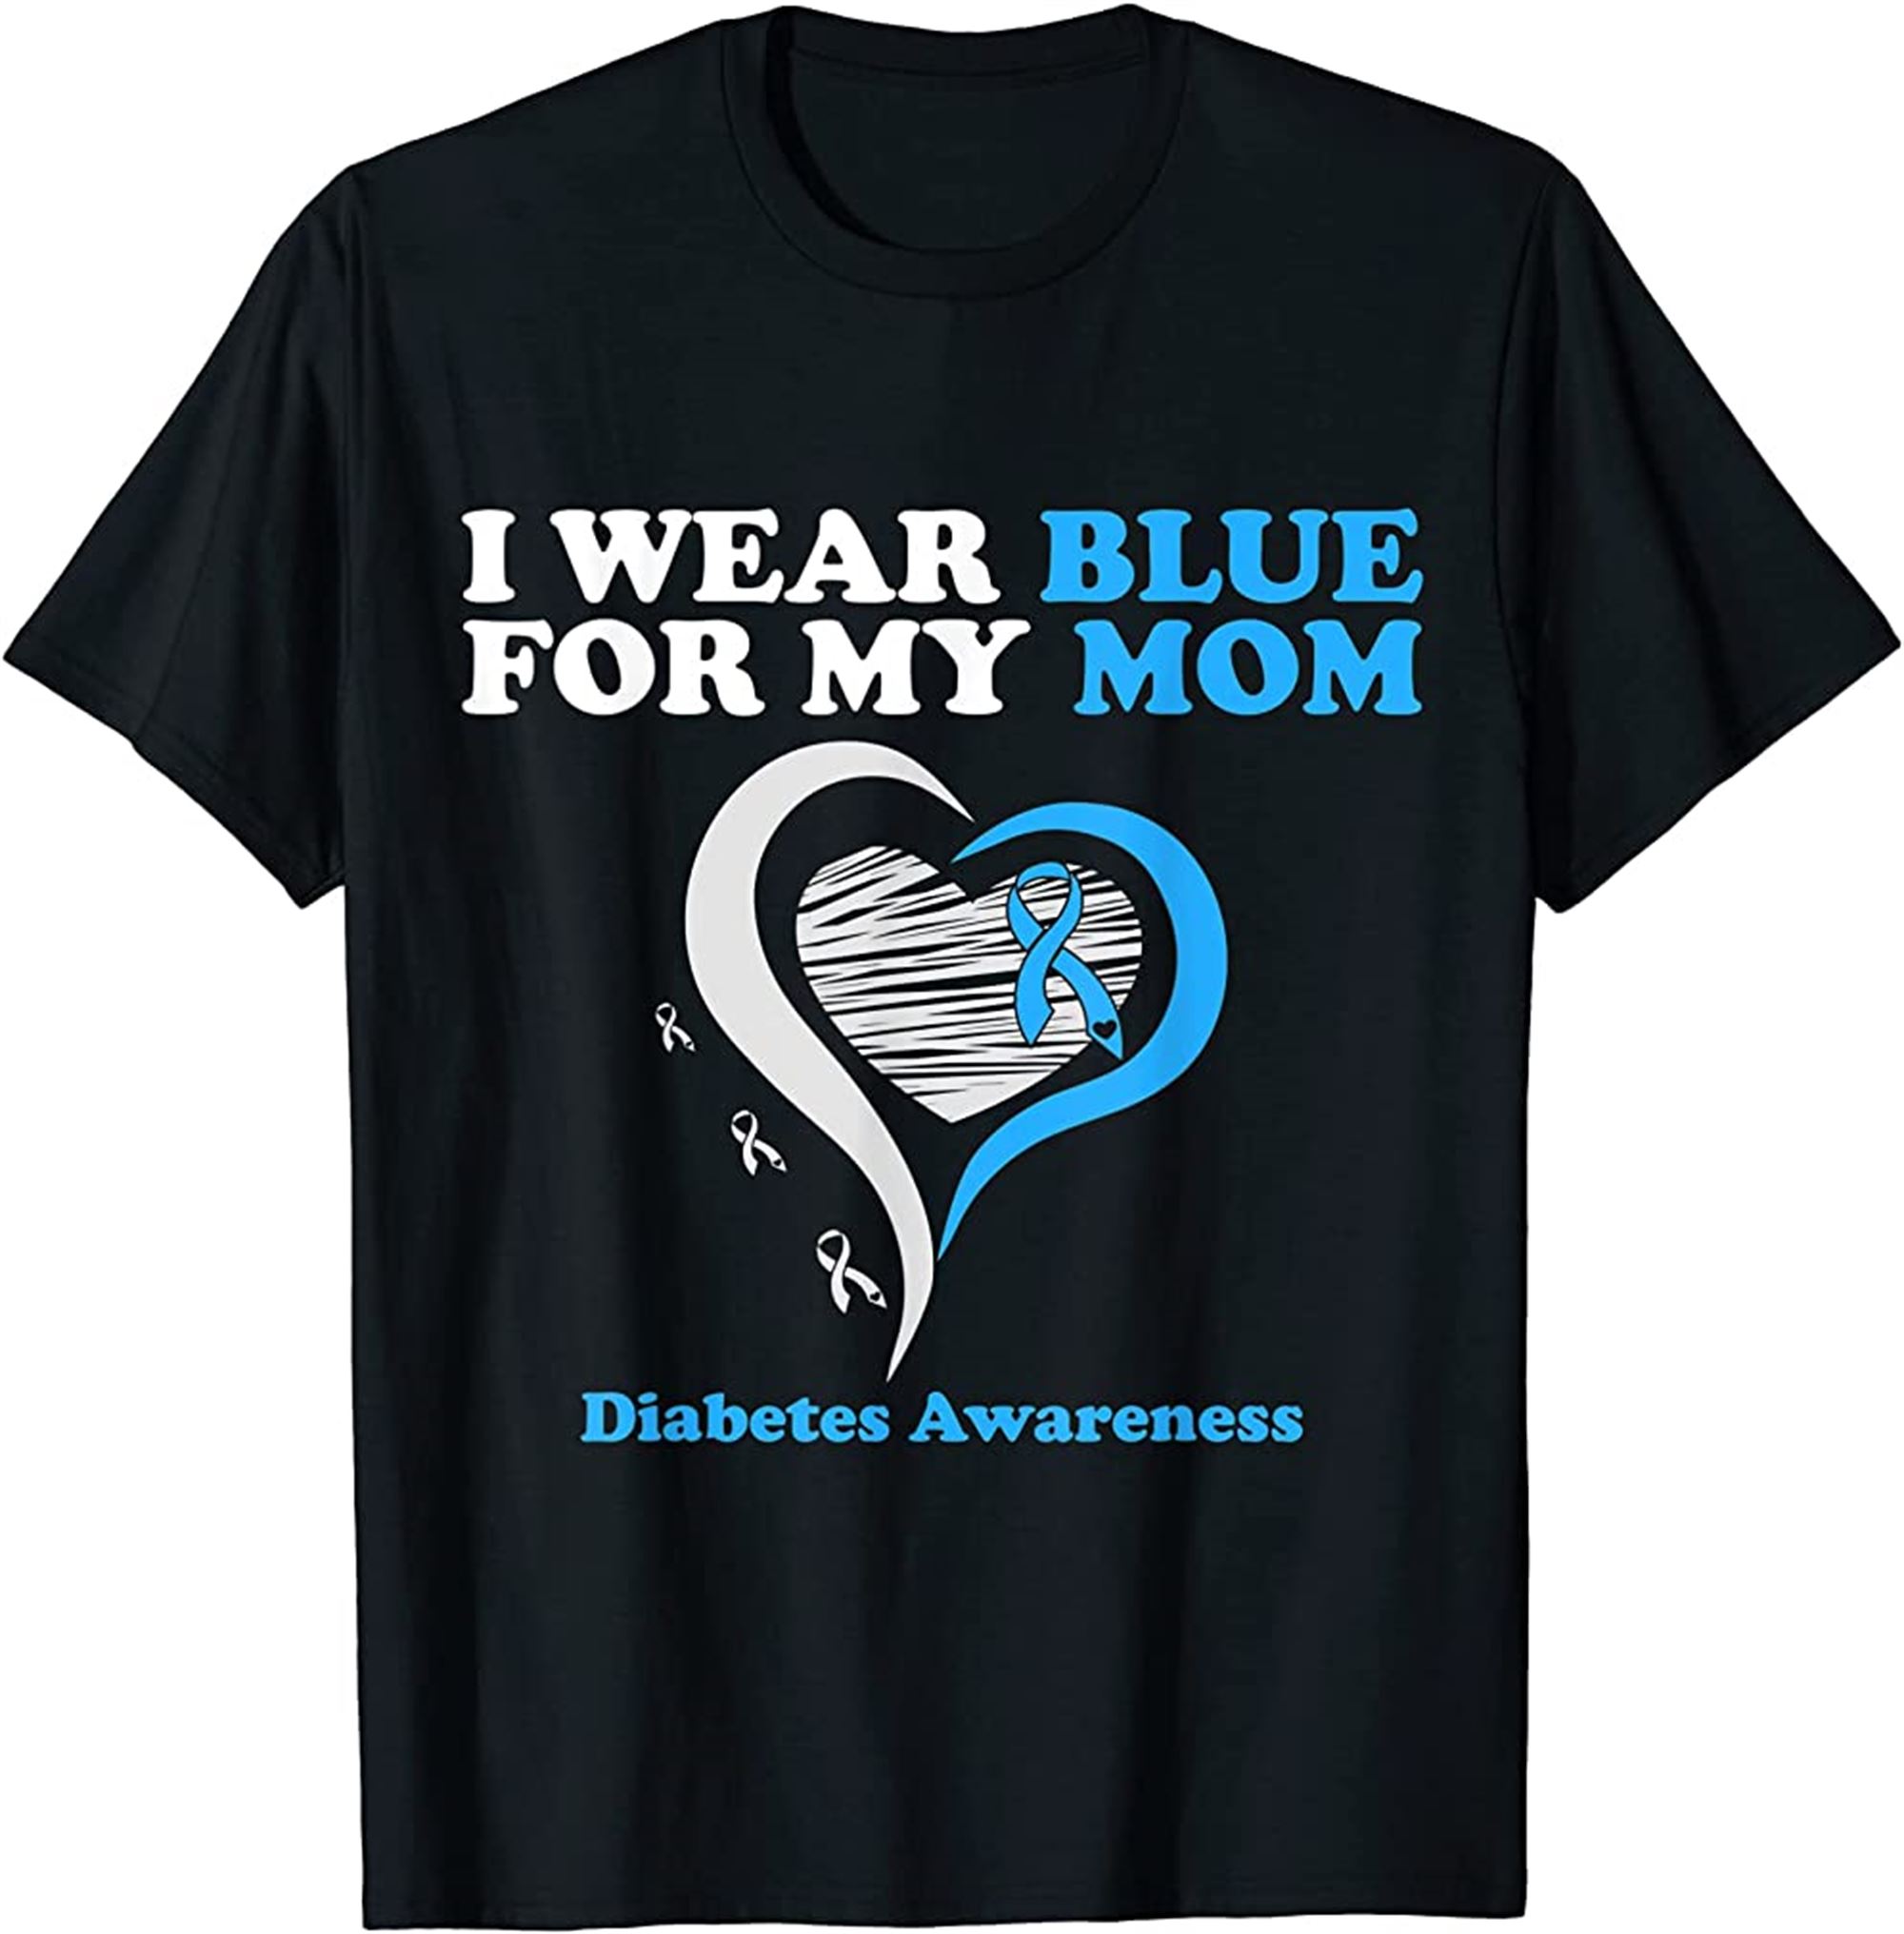 I Wear Blue For My Momblue Ribbonheartdiabetes Awareness T-shirt Plus Size Up To 5xl